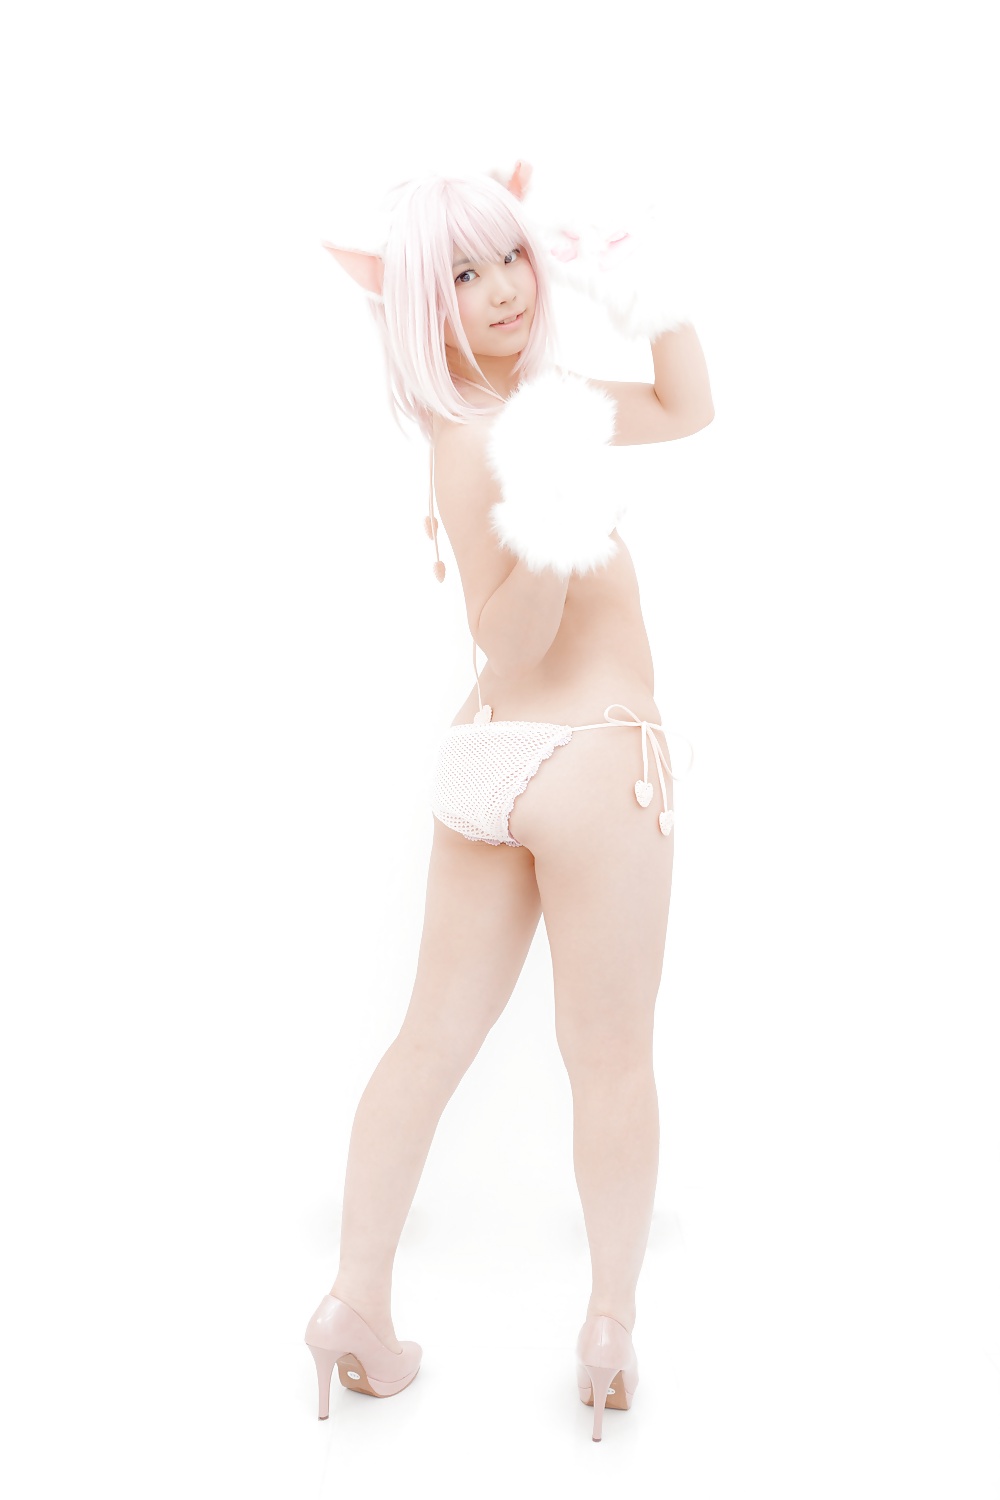 Asiatica cosplay in bianco
 #26558940